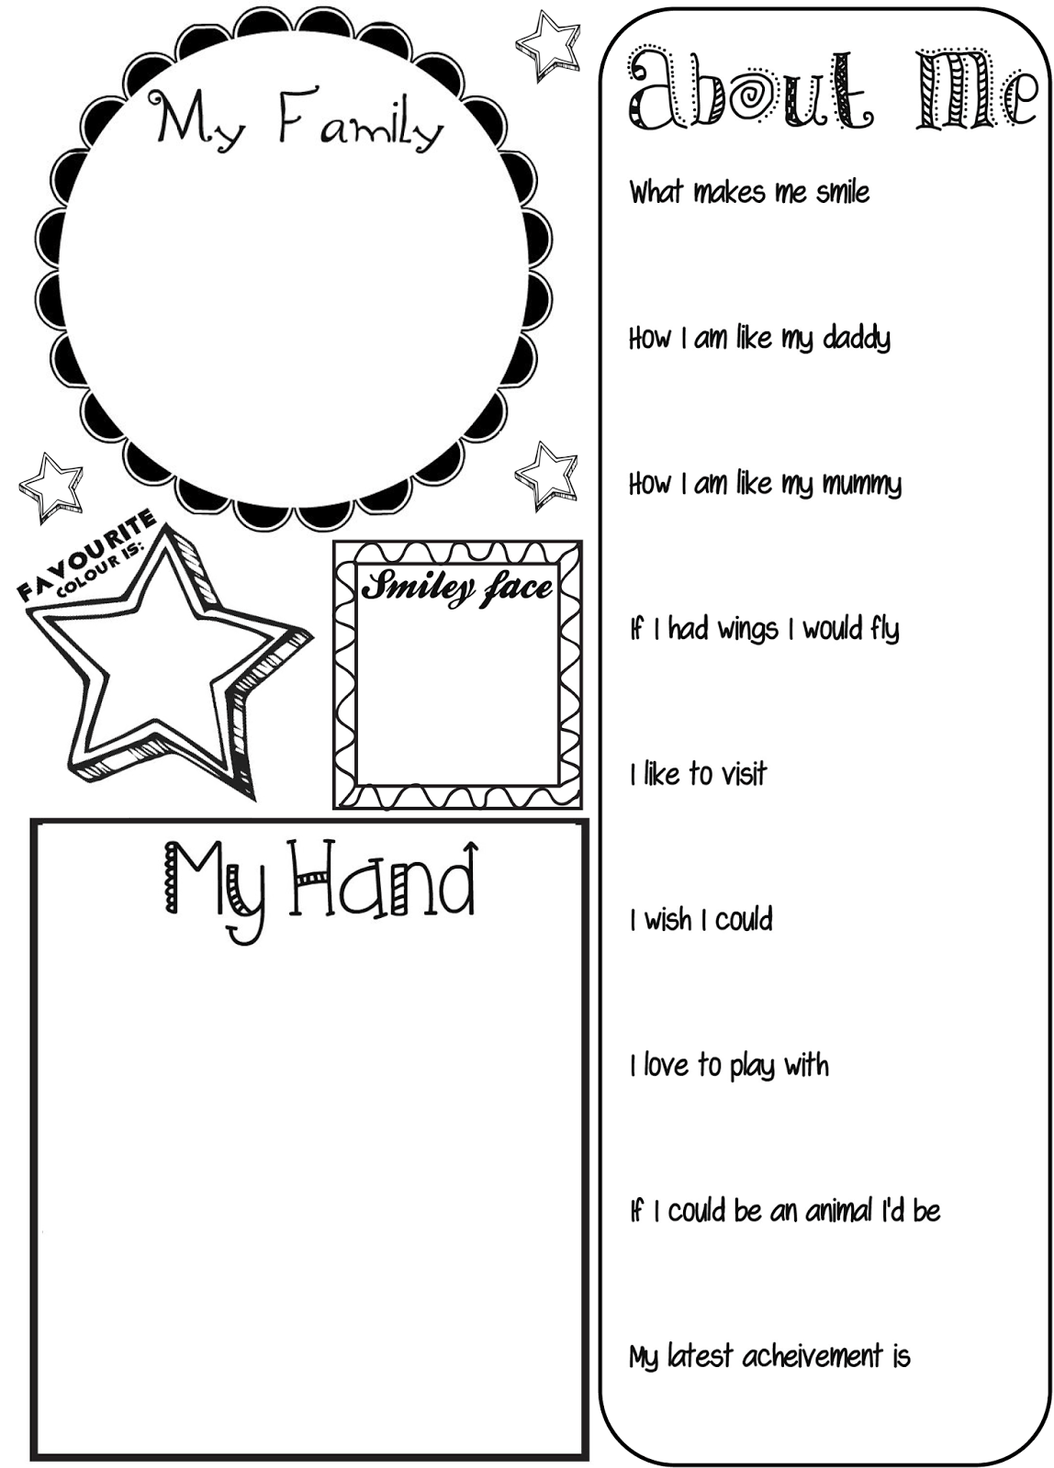 All About Me Activity Sheet Page 2 2 About Me Activities All About 